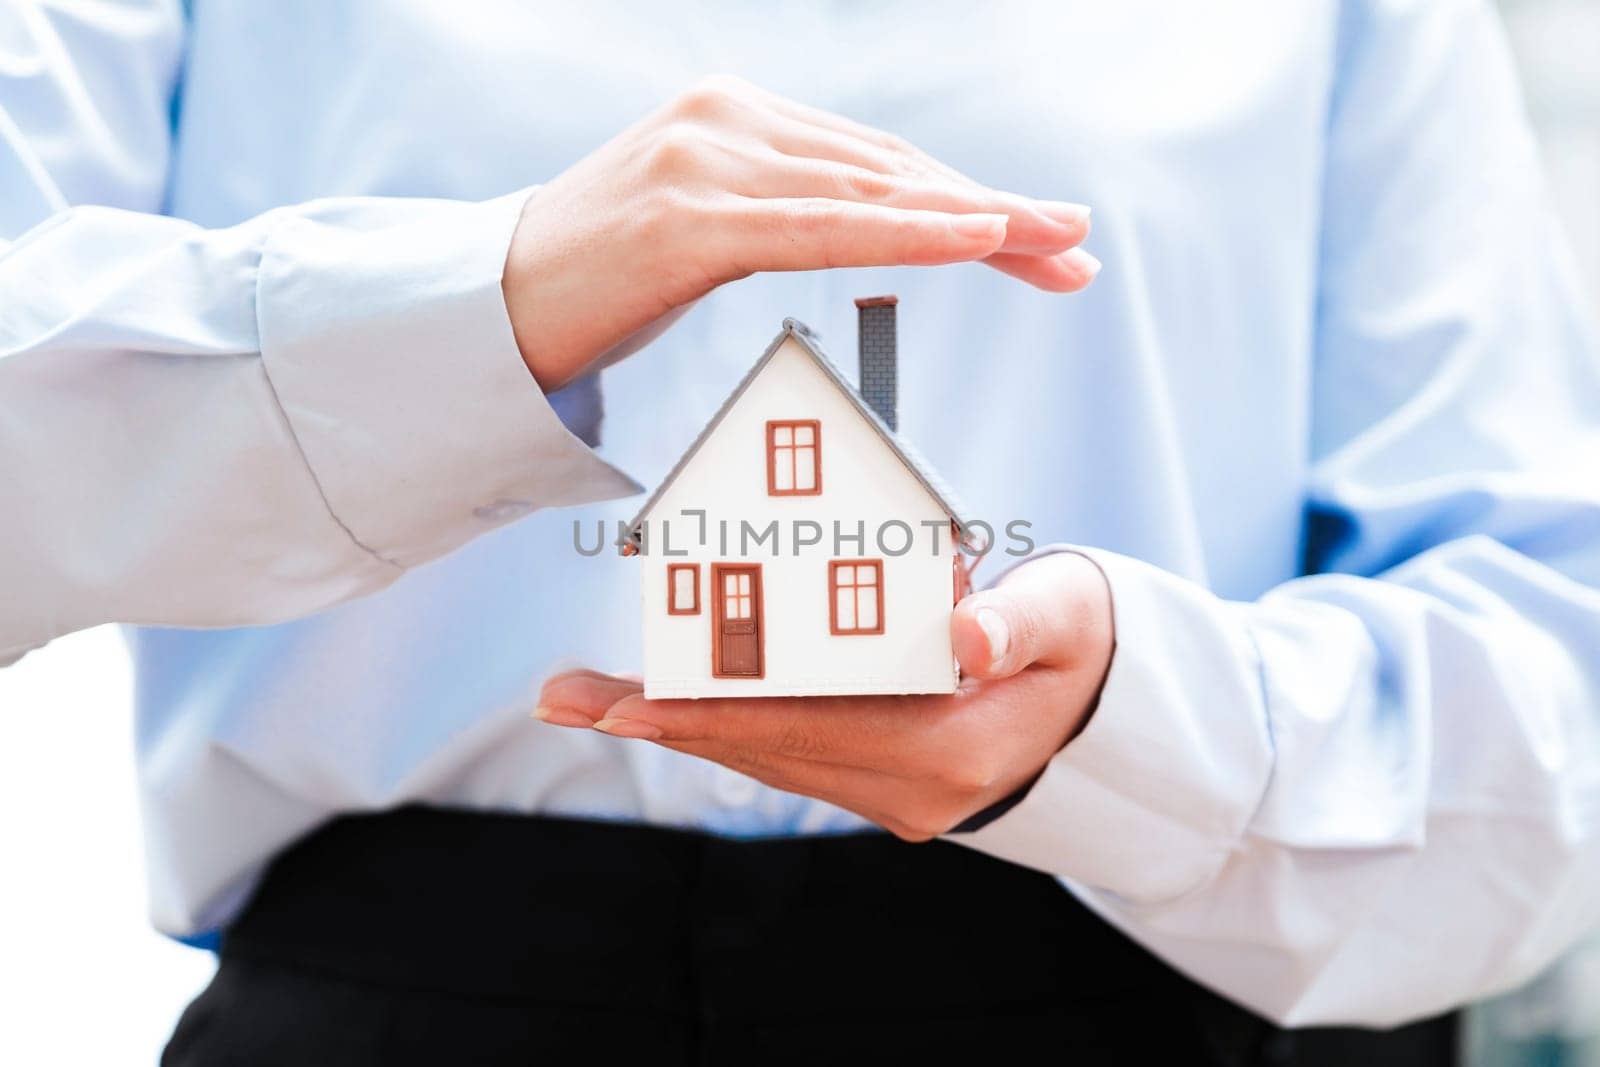 Hands holding a small house model, depicting safety and security in homeownership. by ijeab